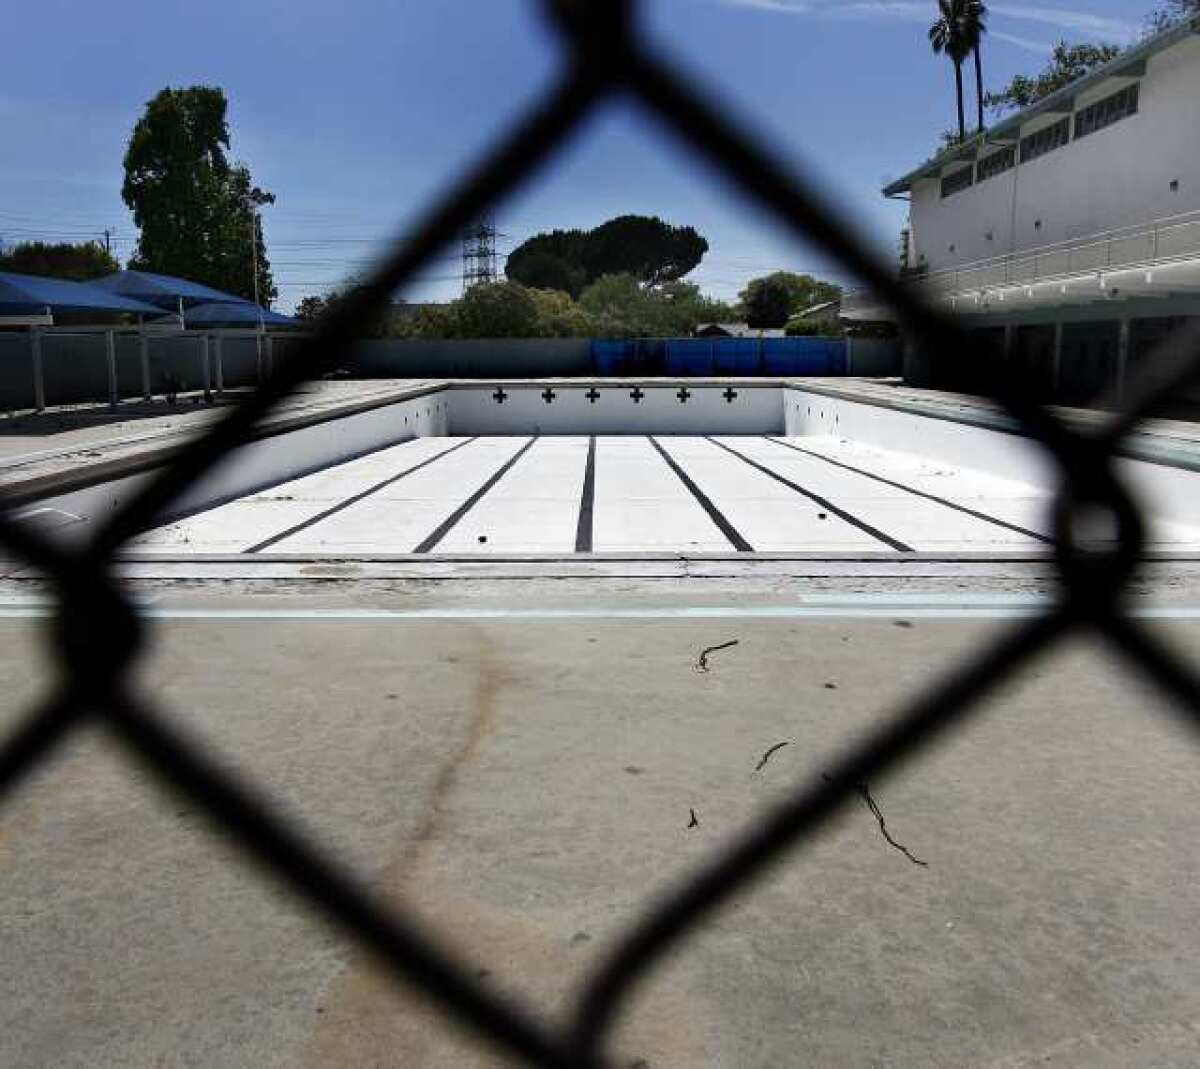 The empty swimming pool at Verdugo Park. The pool has been closed since 2009, and was a former training site for the 1984 Olympics.